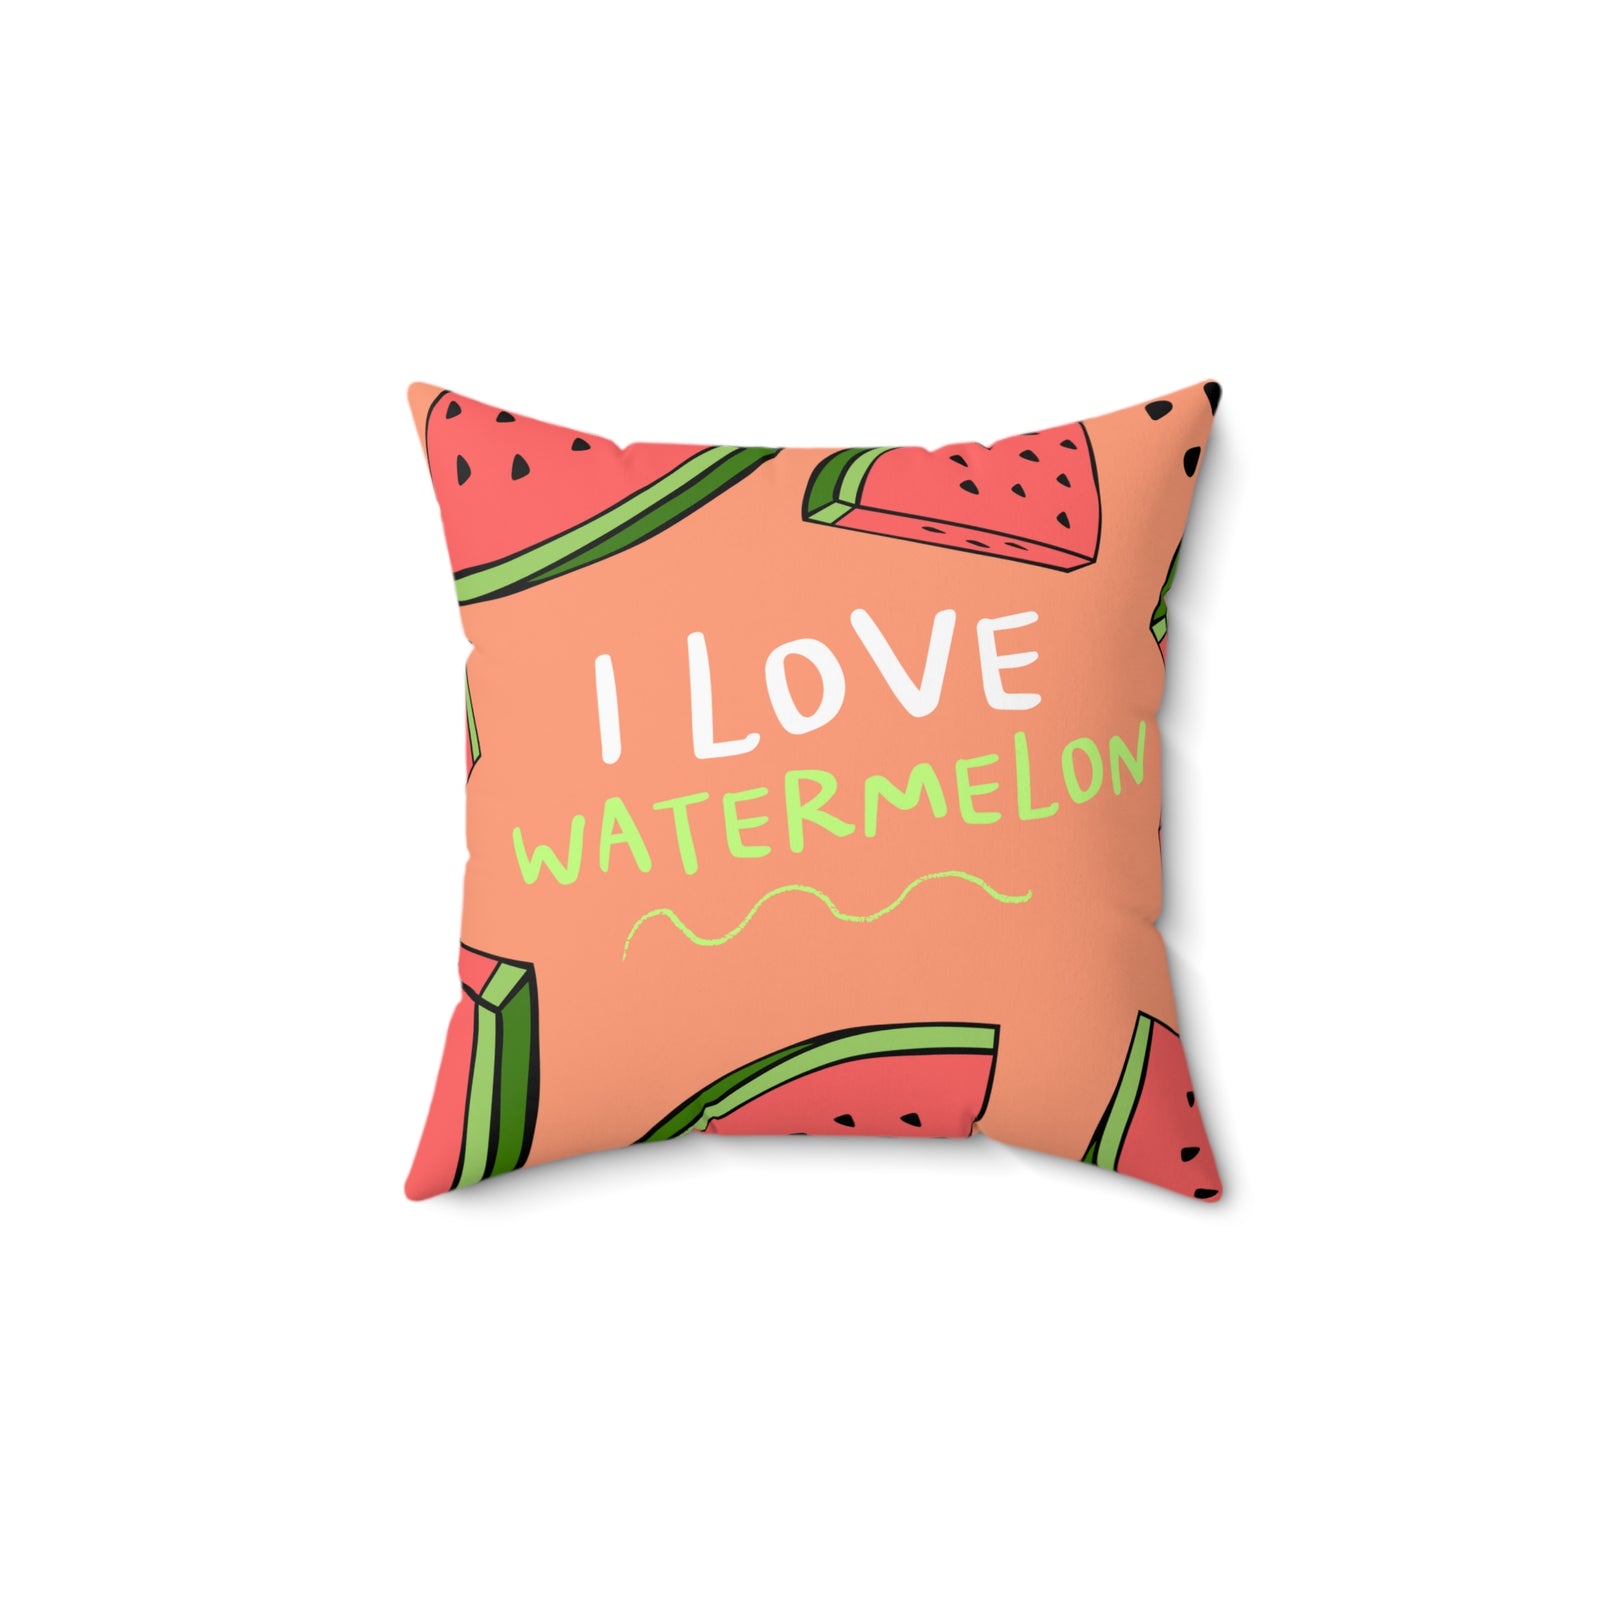 TRYKID Logo and I Love Watermelon Spun Polyester Square Pillow